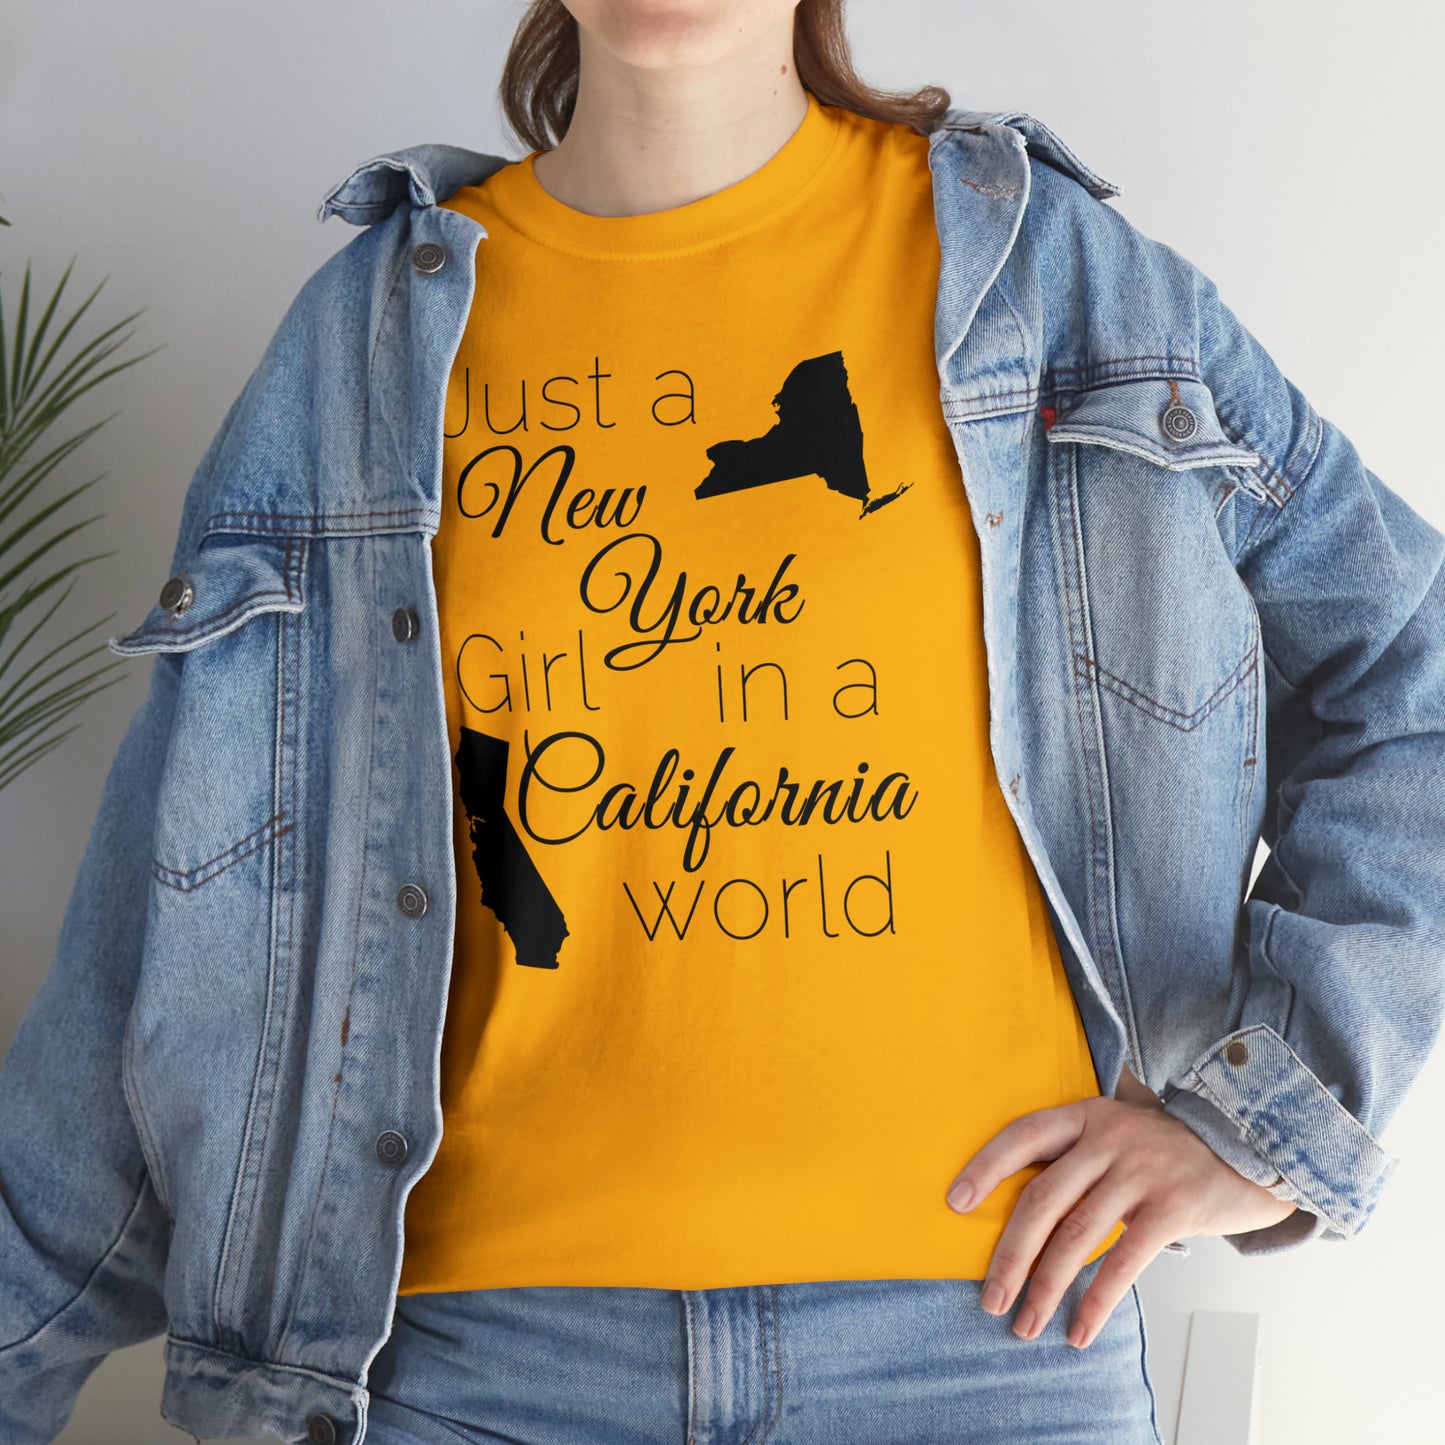 Just a New York Girl in a California World Unisex Heavy Cotton Tee